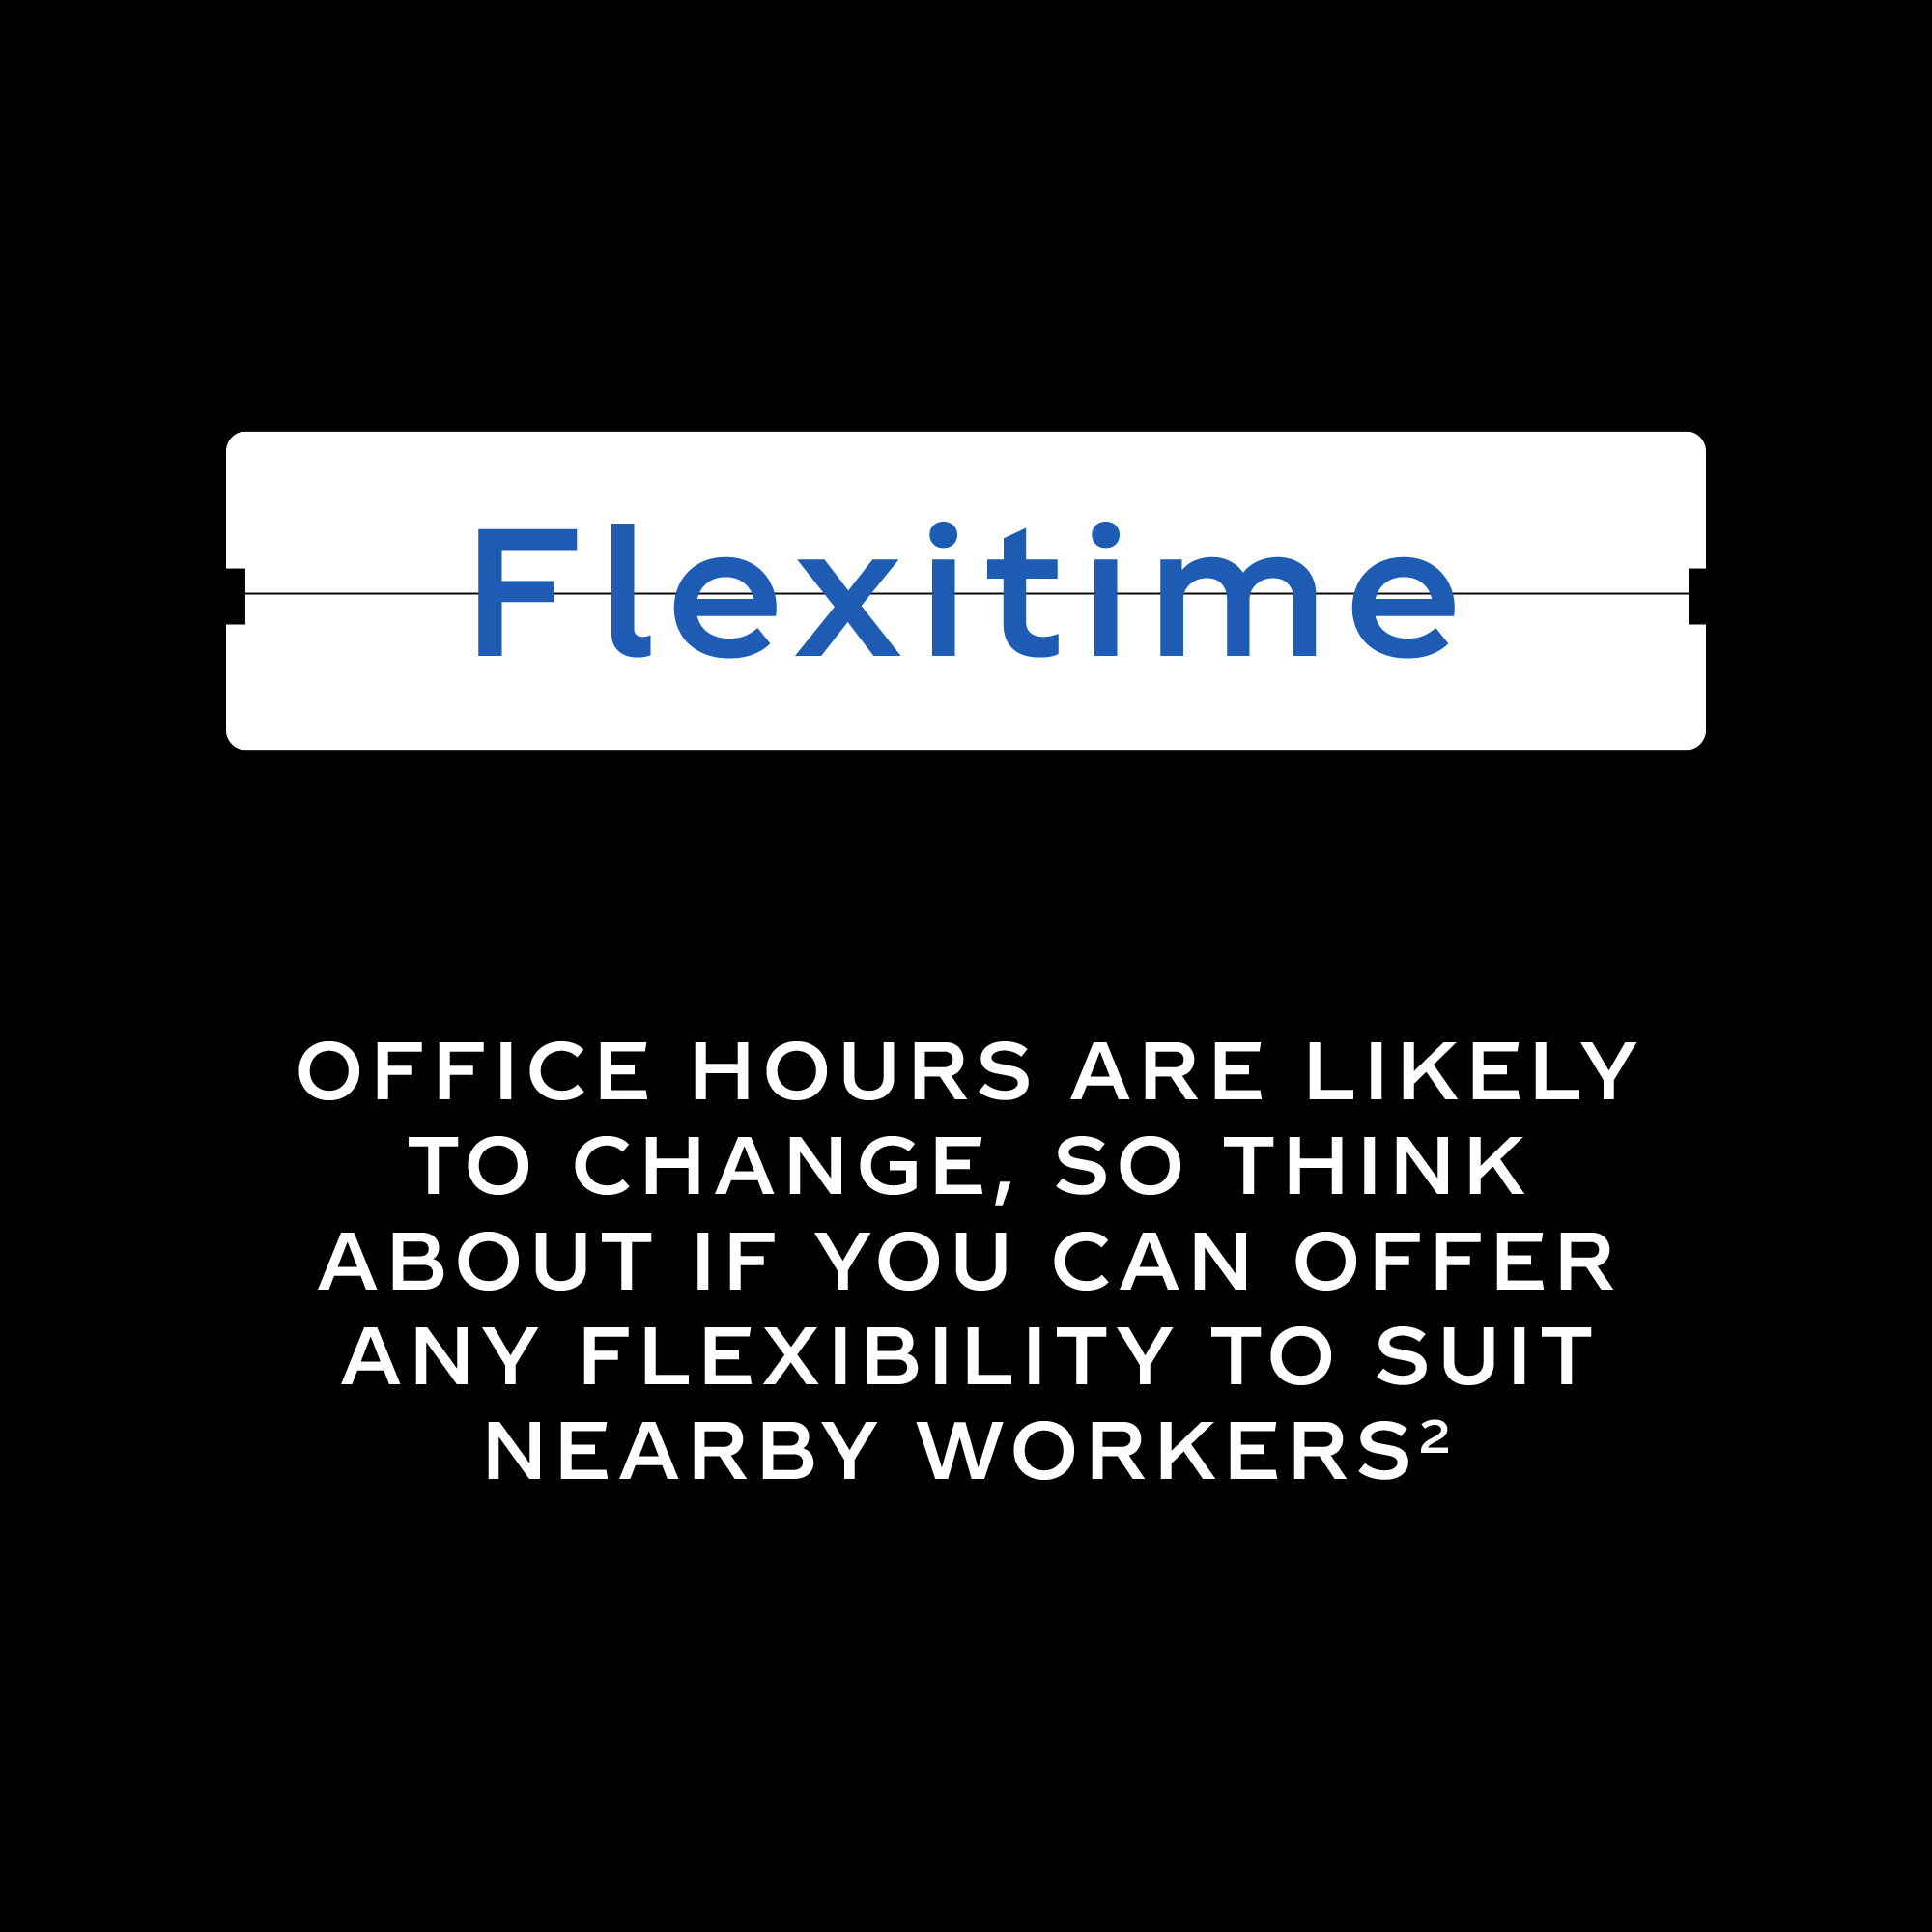 Button-like element with 'Flexitime' text, and white text that says 'Office hours are likely to change, so think about if you can offer any flexibility to suit nearby workers'